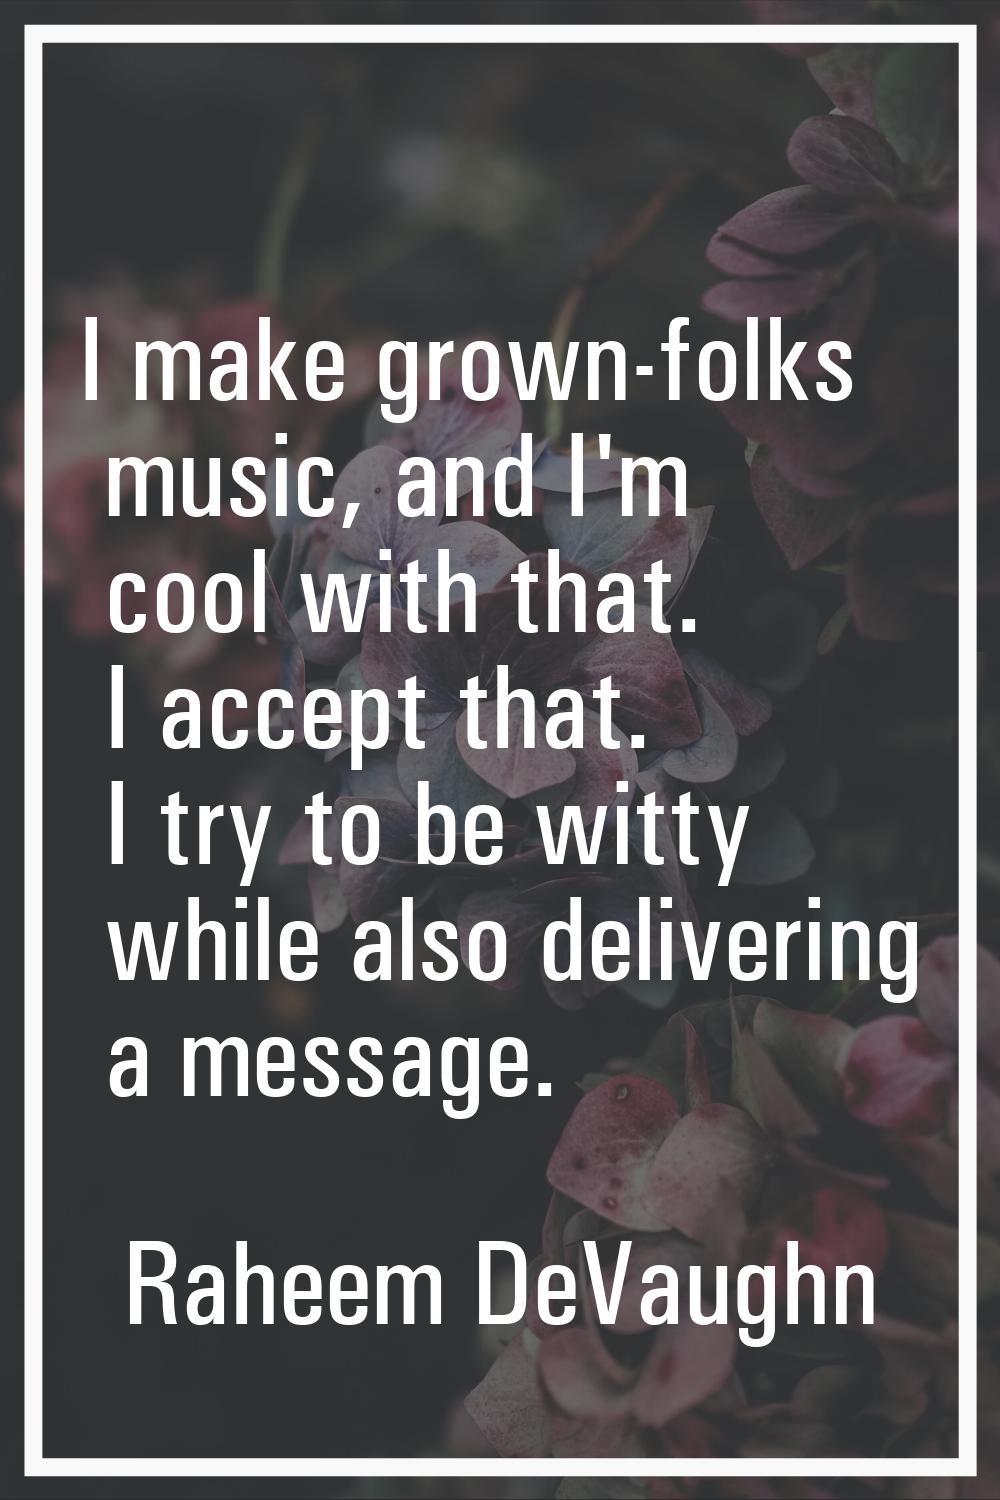 I make grown-folks music, and I'm cool with that. I accept that. I try to be witty while also deliv